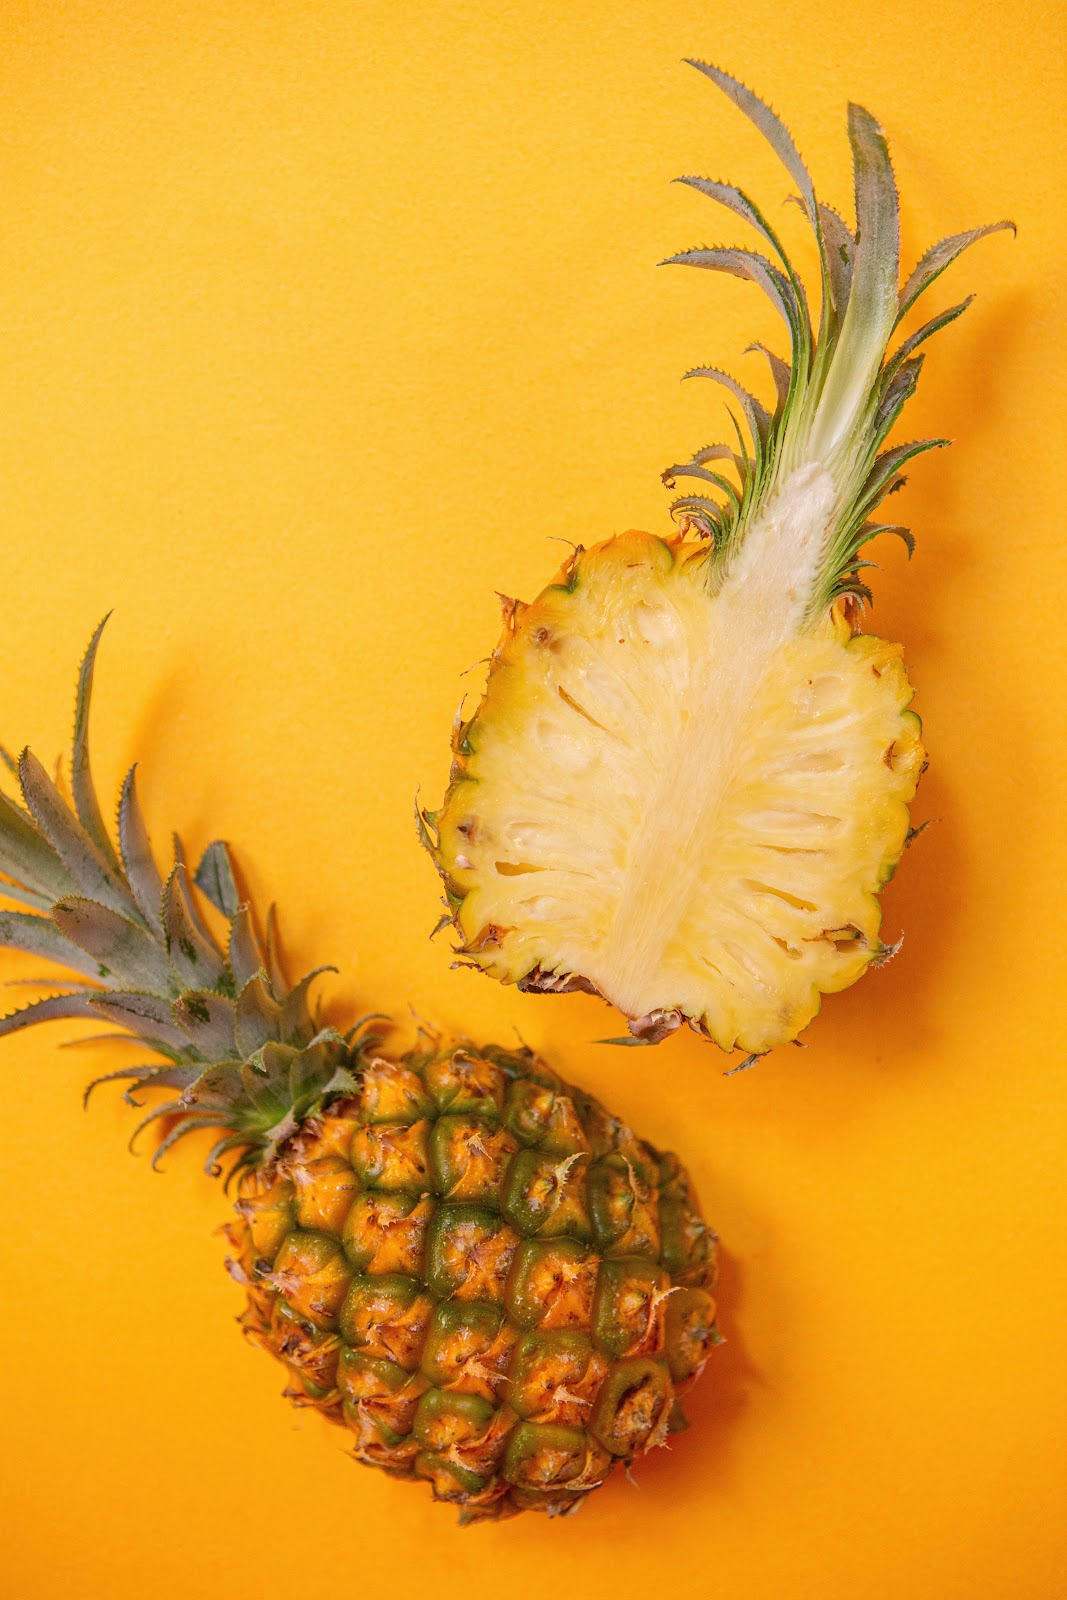 Does Pineapple Reduce Bloating?